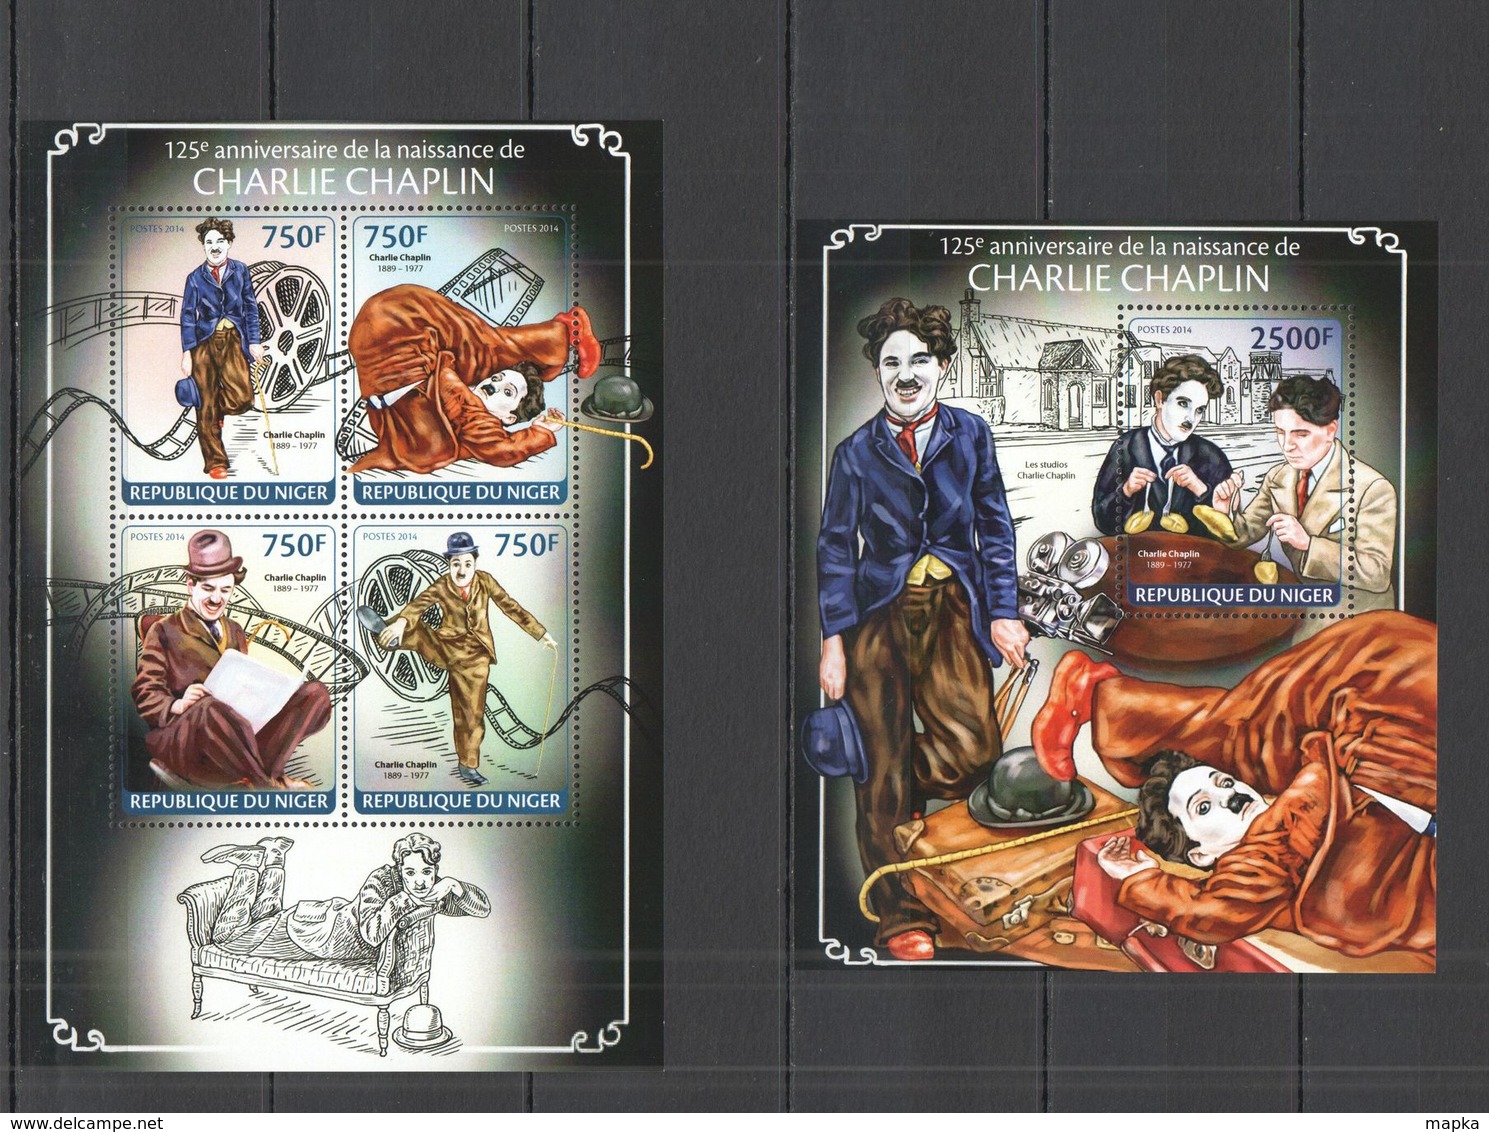 ST2685 2014 NIGER FAMOUS PEOPLE 125TH ANNIVERSARY CHARLIE CHAPLIN KB+BL MNH - Actores